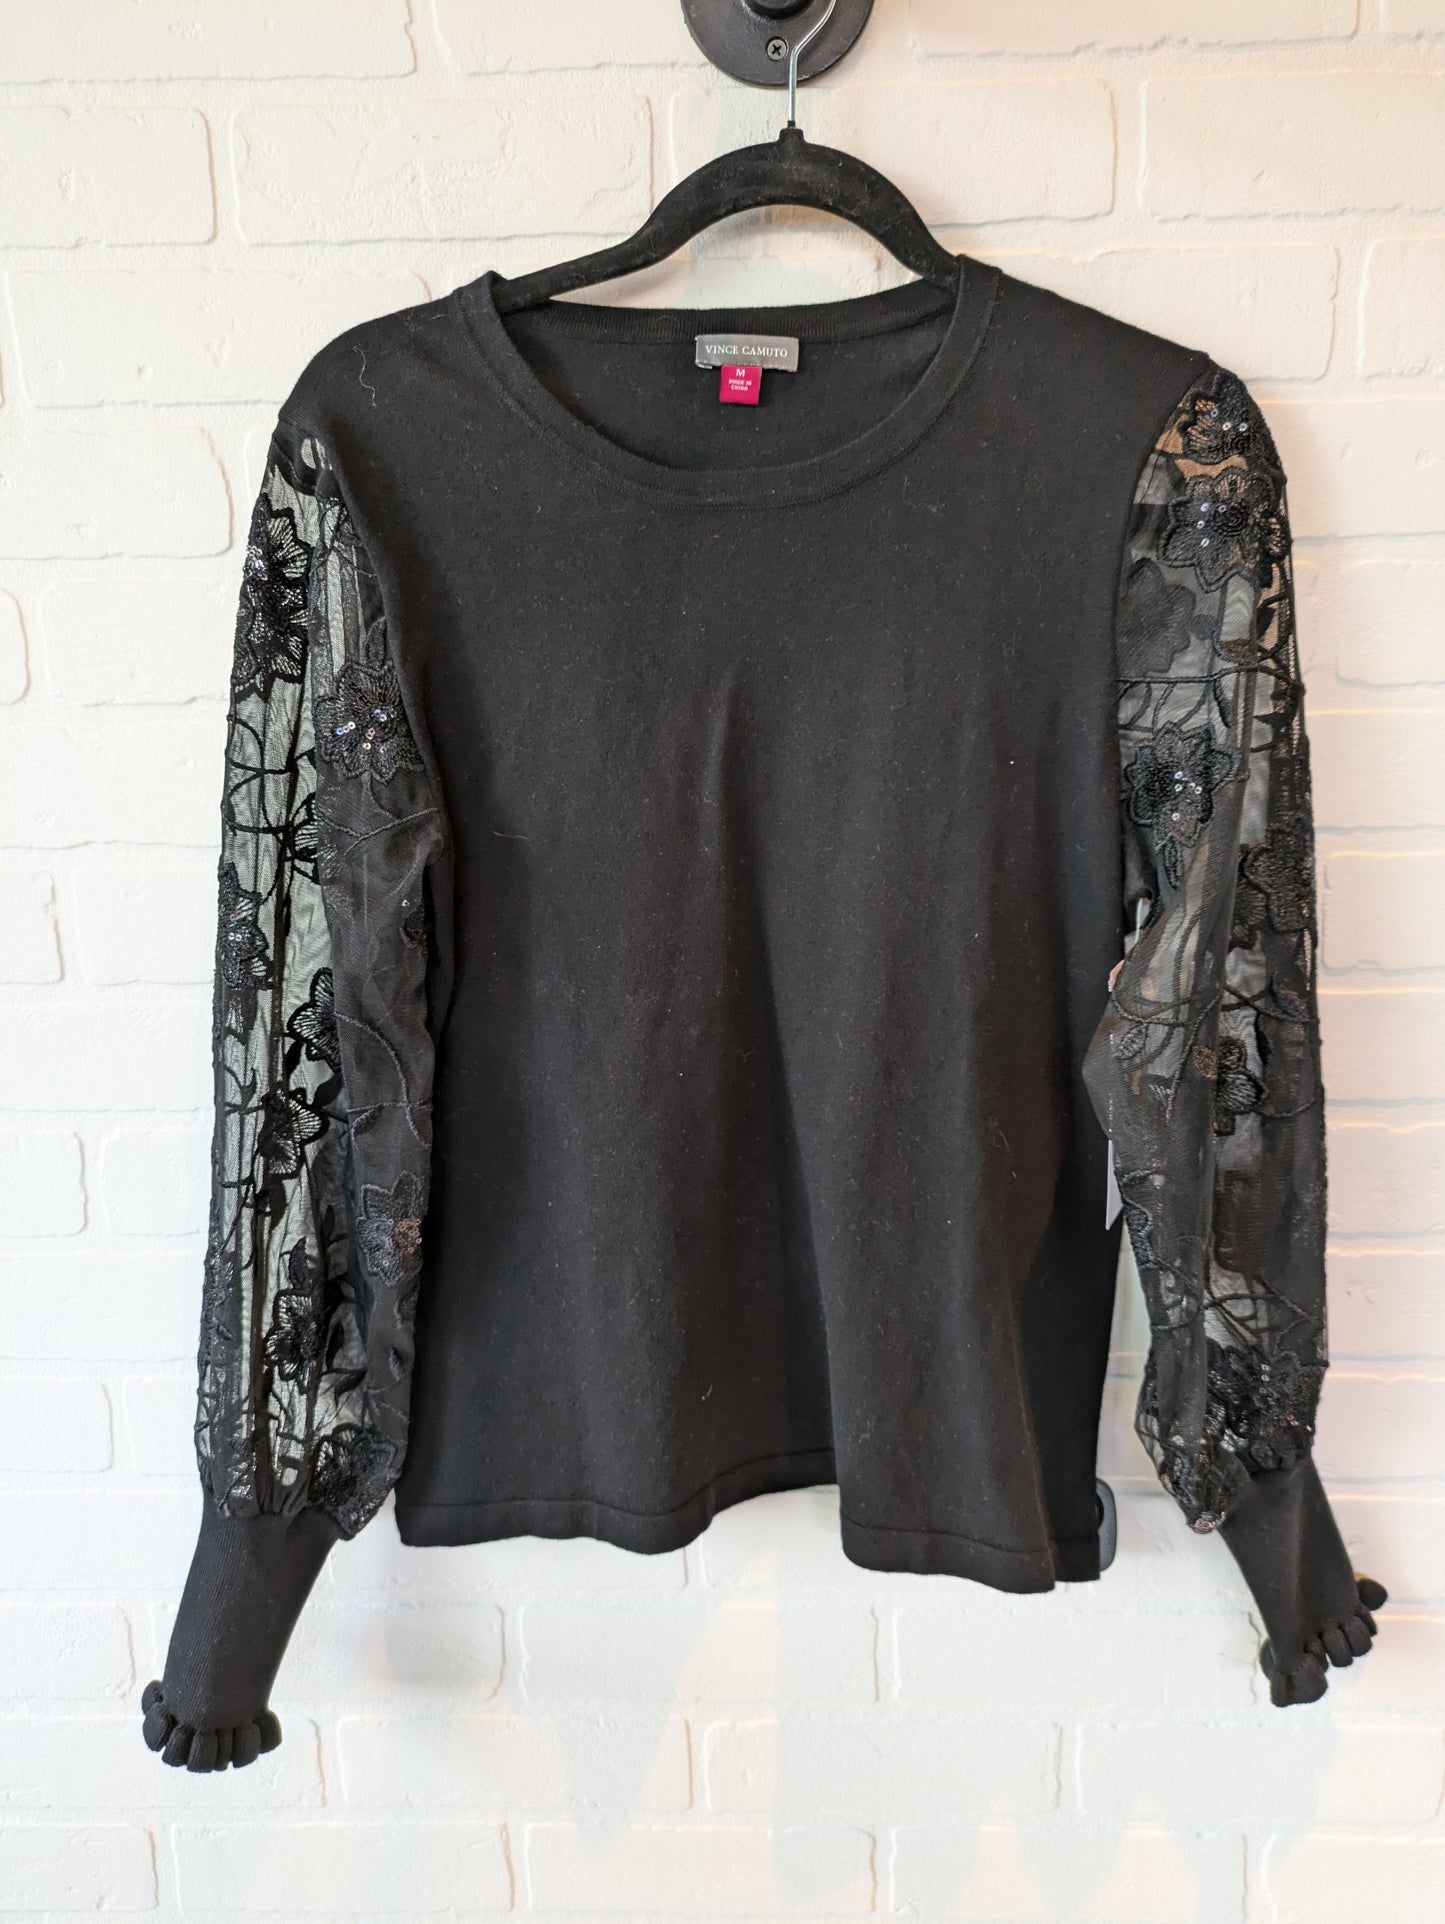 Black Sweater Vince Camuto, Size M